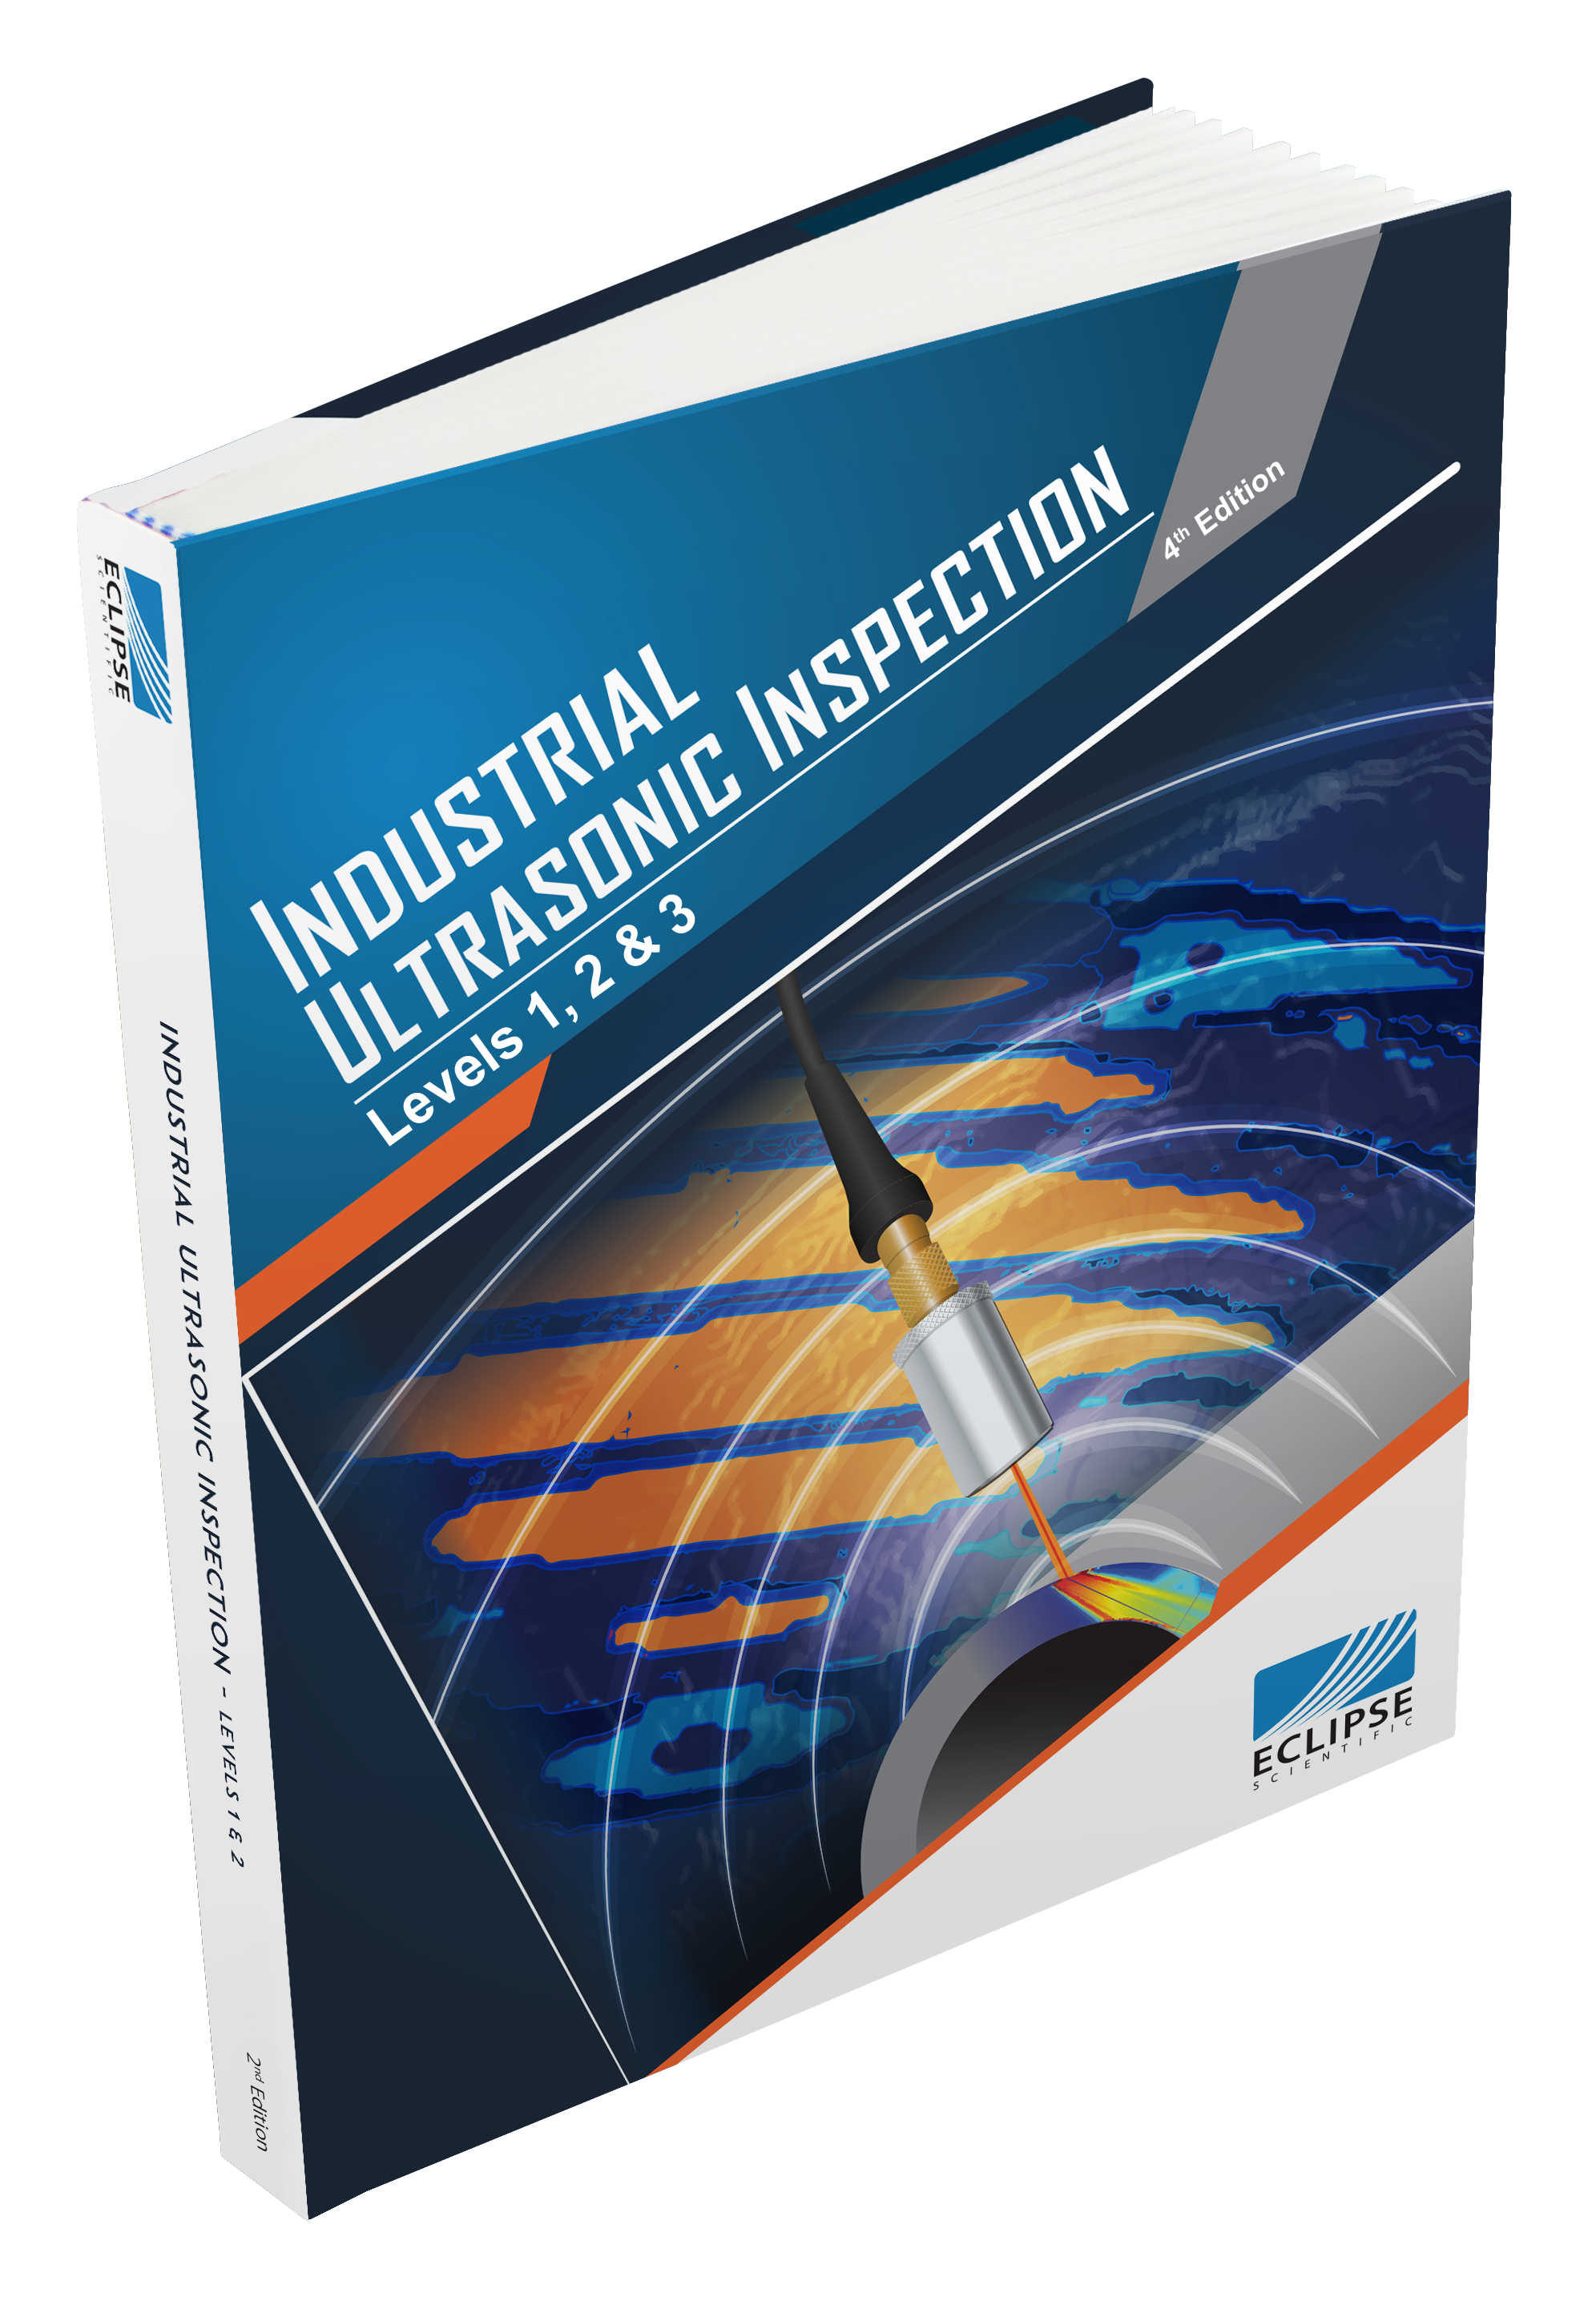 Industrial Ultrasonic Inspection Levels 1, 2 & 3 - 4th Edition